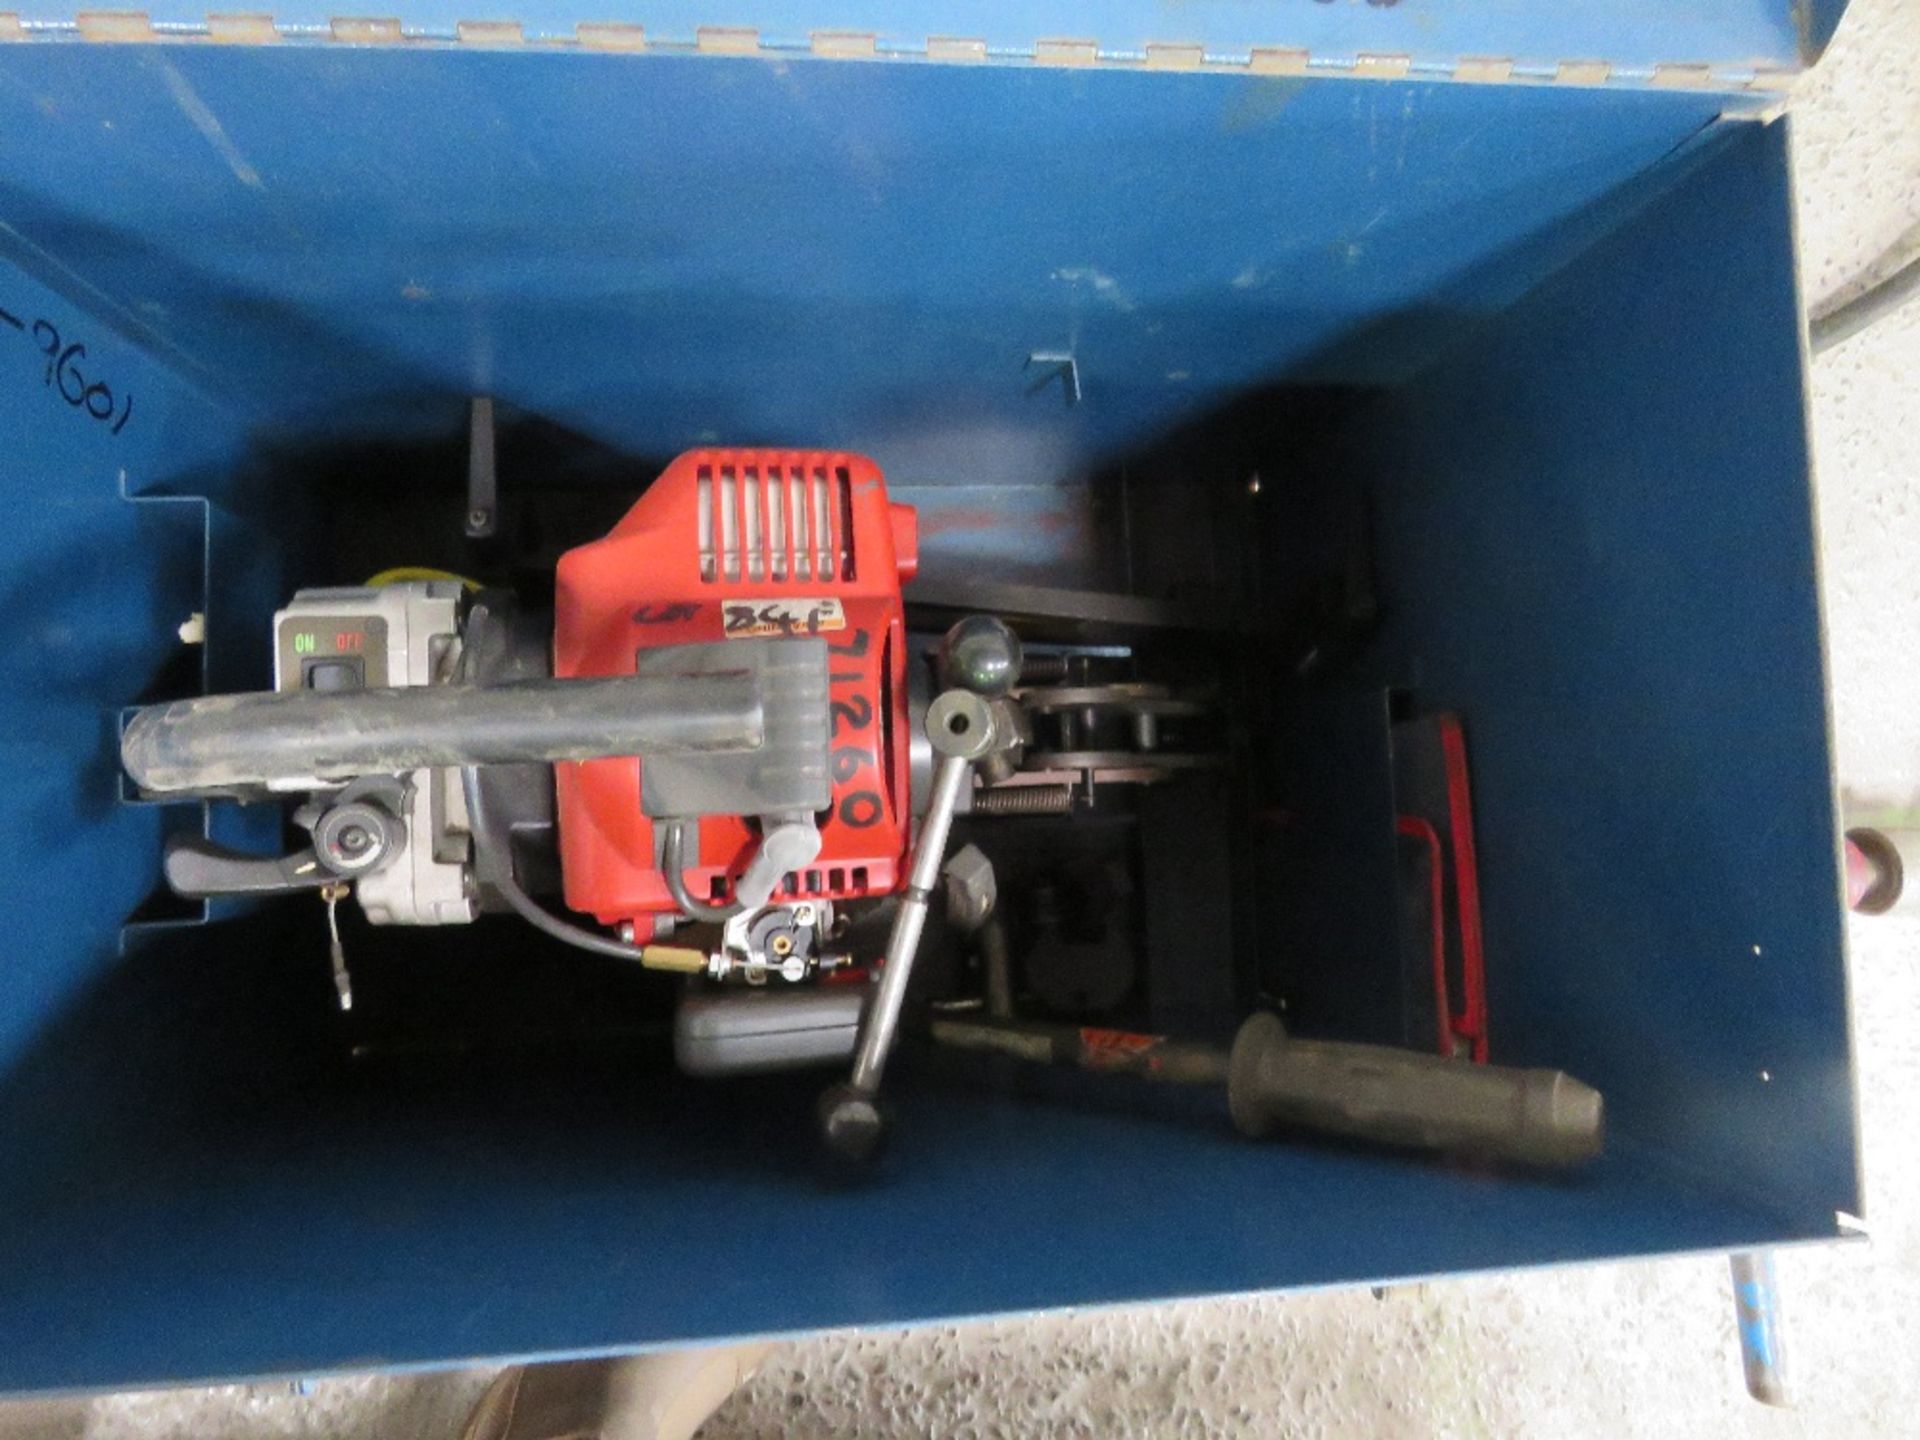 CEMBRE PETROL ENGINED RAIL DRILL IN A BOX. DIRECT FROM A LOCAL GROUNDWORKS COMPANY AS PART OF THE - Image 4 of 5